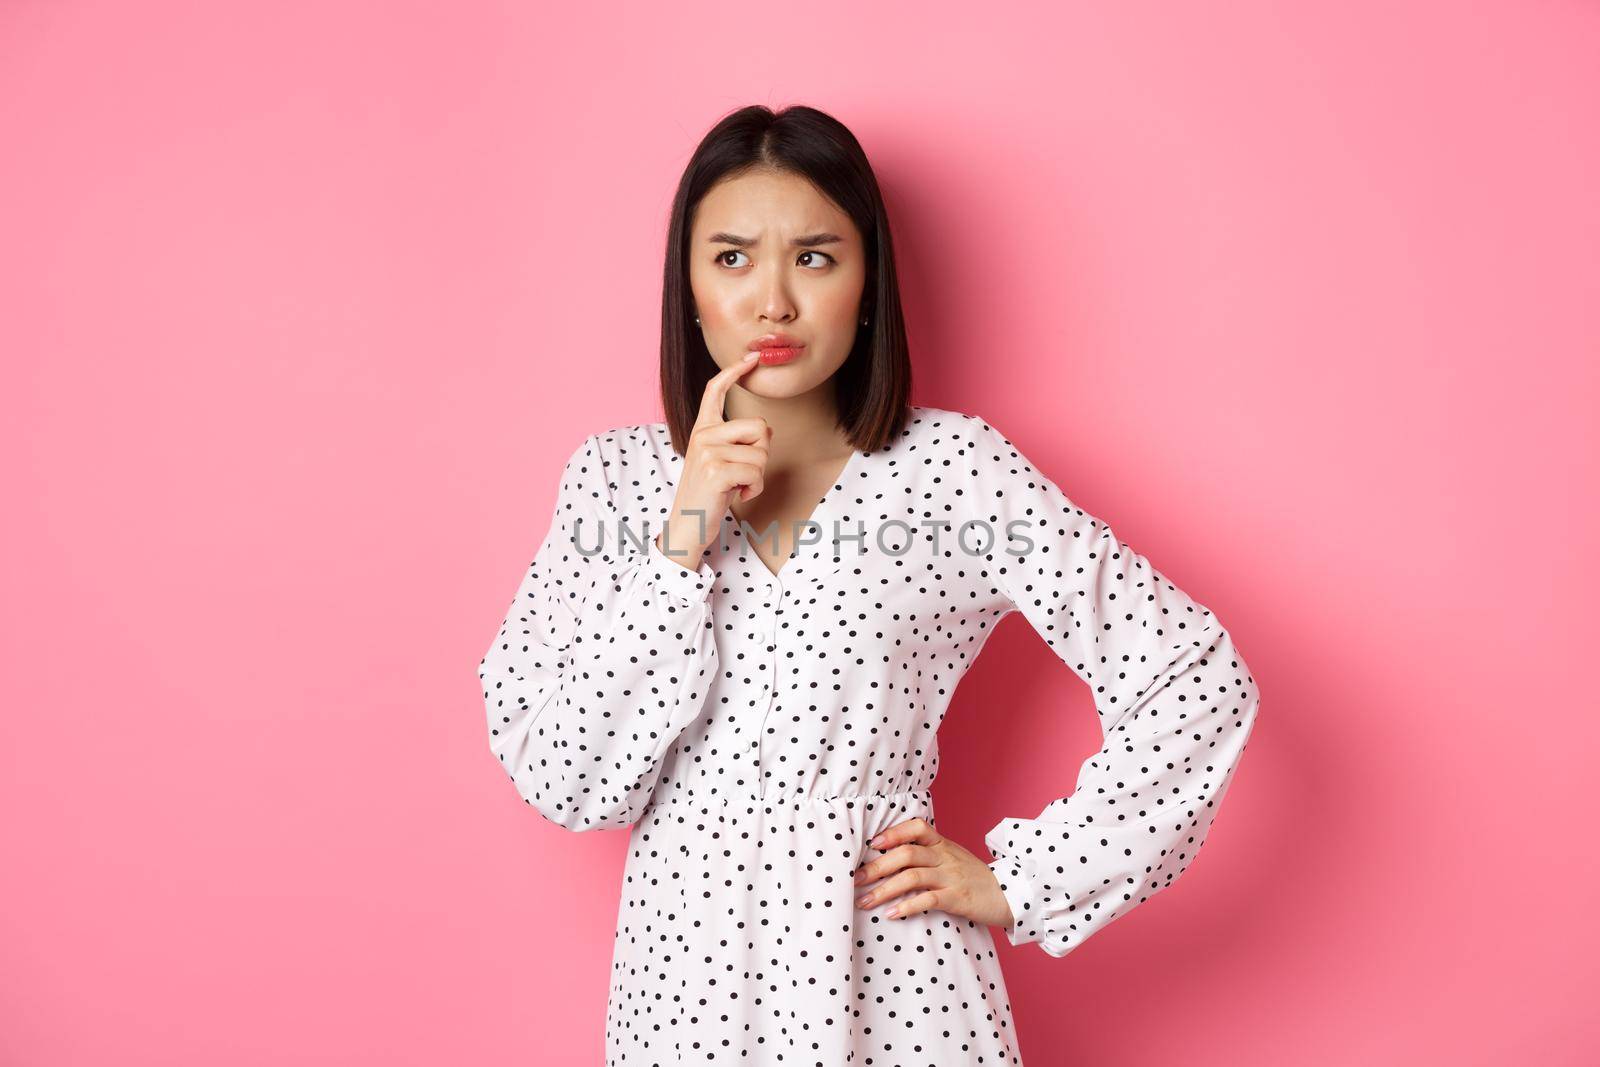 Troubled asian girl making decision, frowning and touching lip while thinking, looking unsure at upper left corner and choosing, standing over pink background.